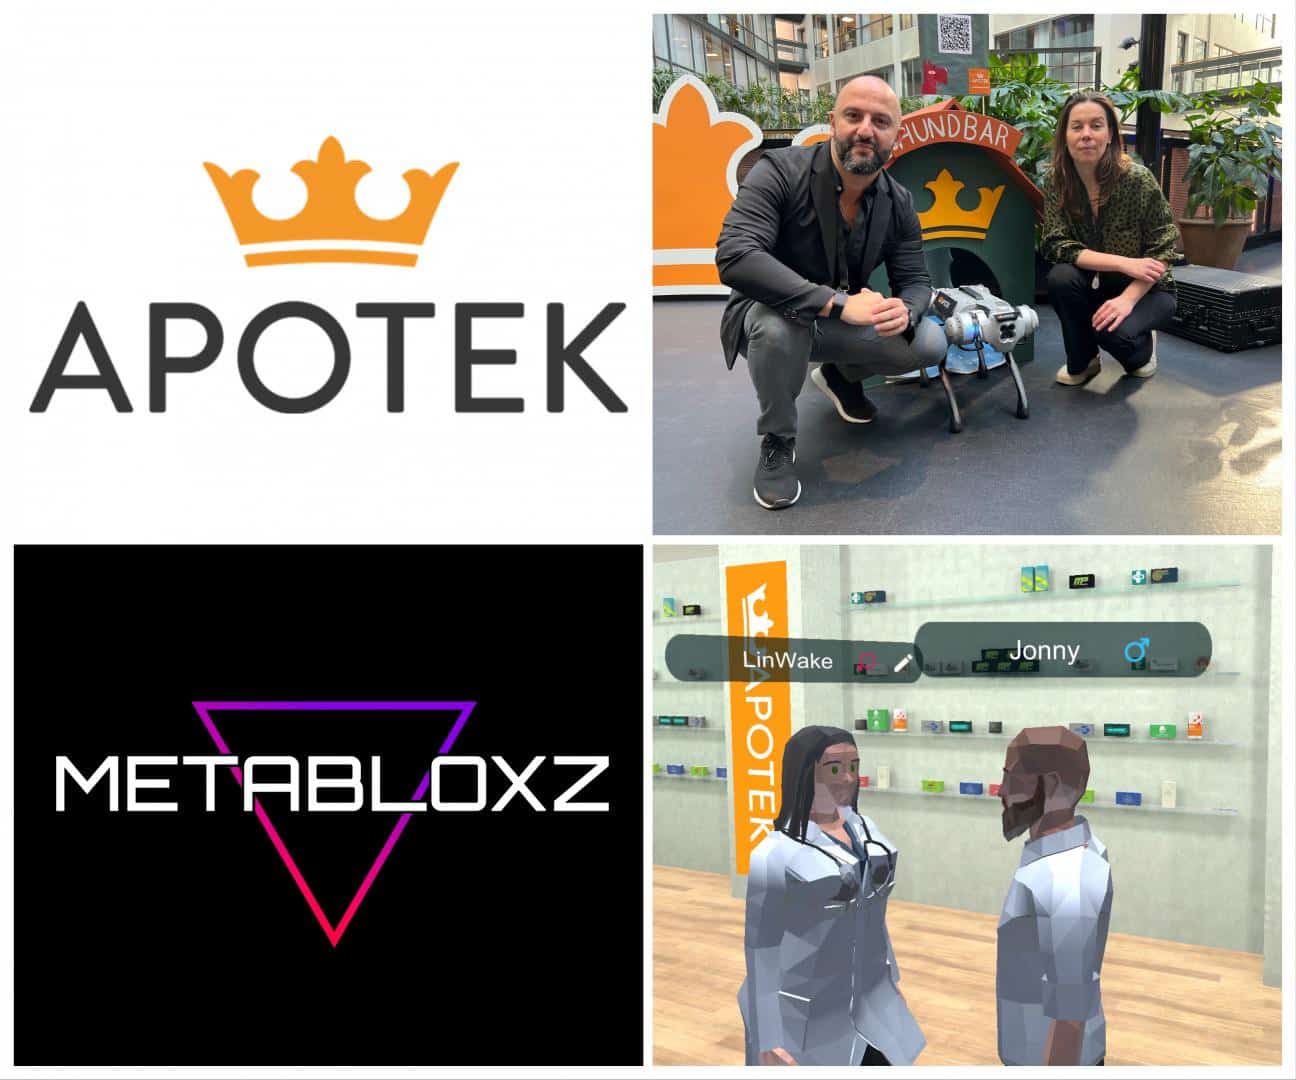 Metabloxz Brings a Major Swedish Pharmacy Chain Into the Metaverse